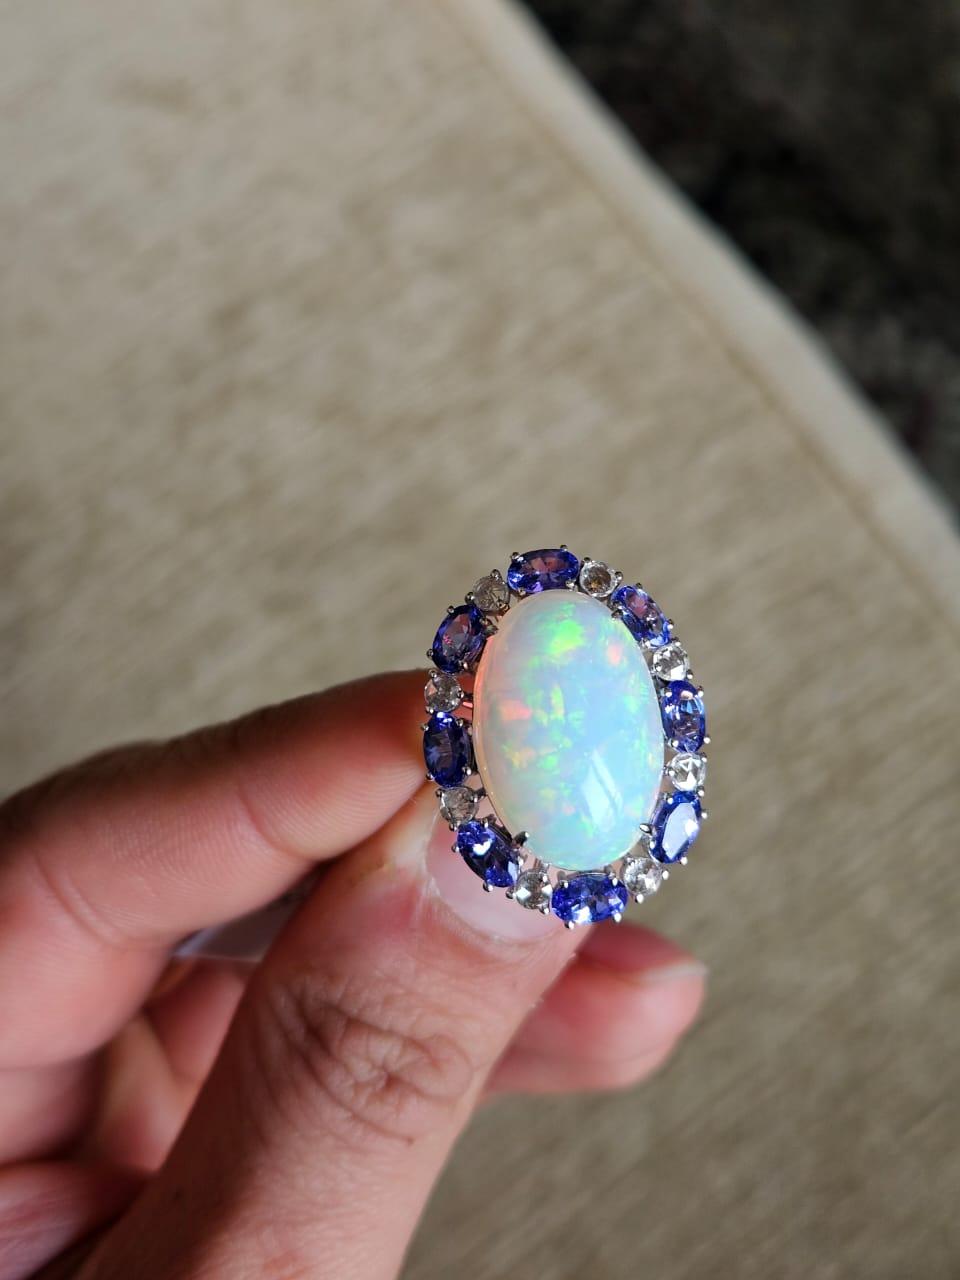 A very gorgeous and beautiful, modern style Opal & Tanzanite Cocktail Engagement Ring set in 18K White Gold & Diamonds. The weight of the Opal is 9.20 carats. The Opal is of Ethiopian origin. The Tanzanite weight is 2.12 carats. The Tanzanites are